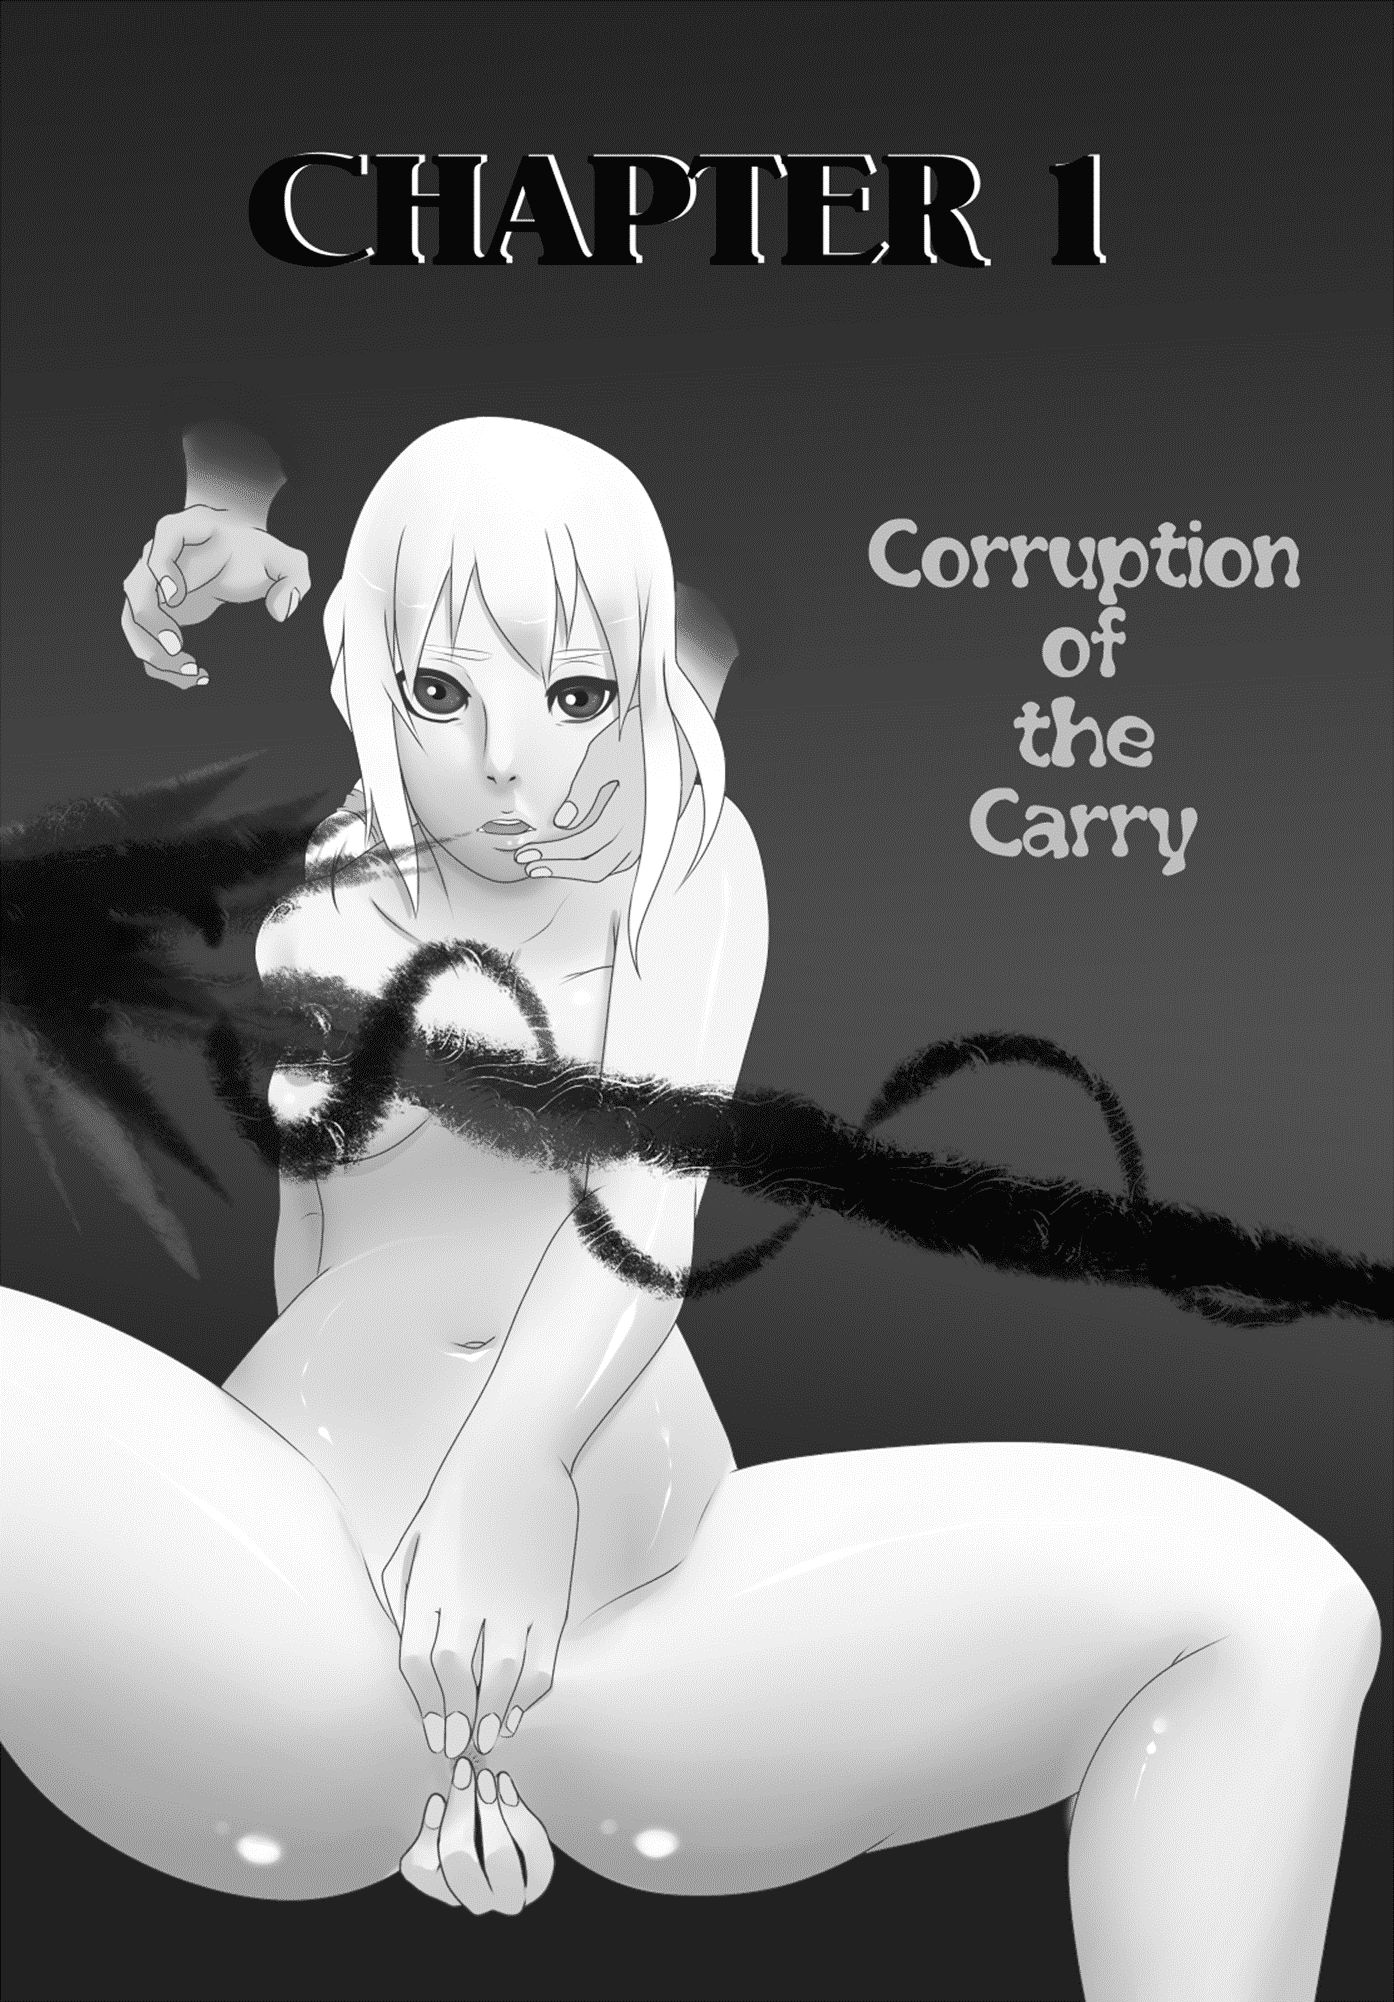 The Lust Bug: #1 Corruption of the carry - 3